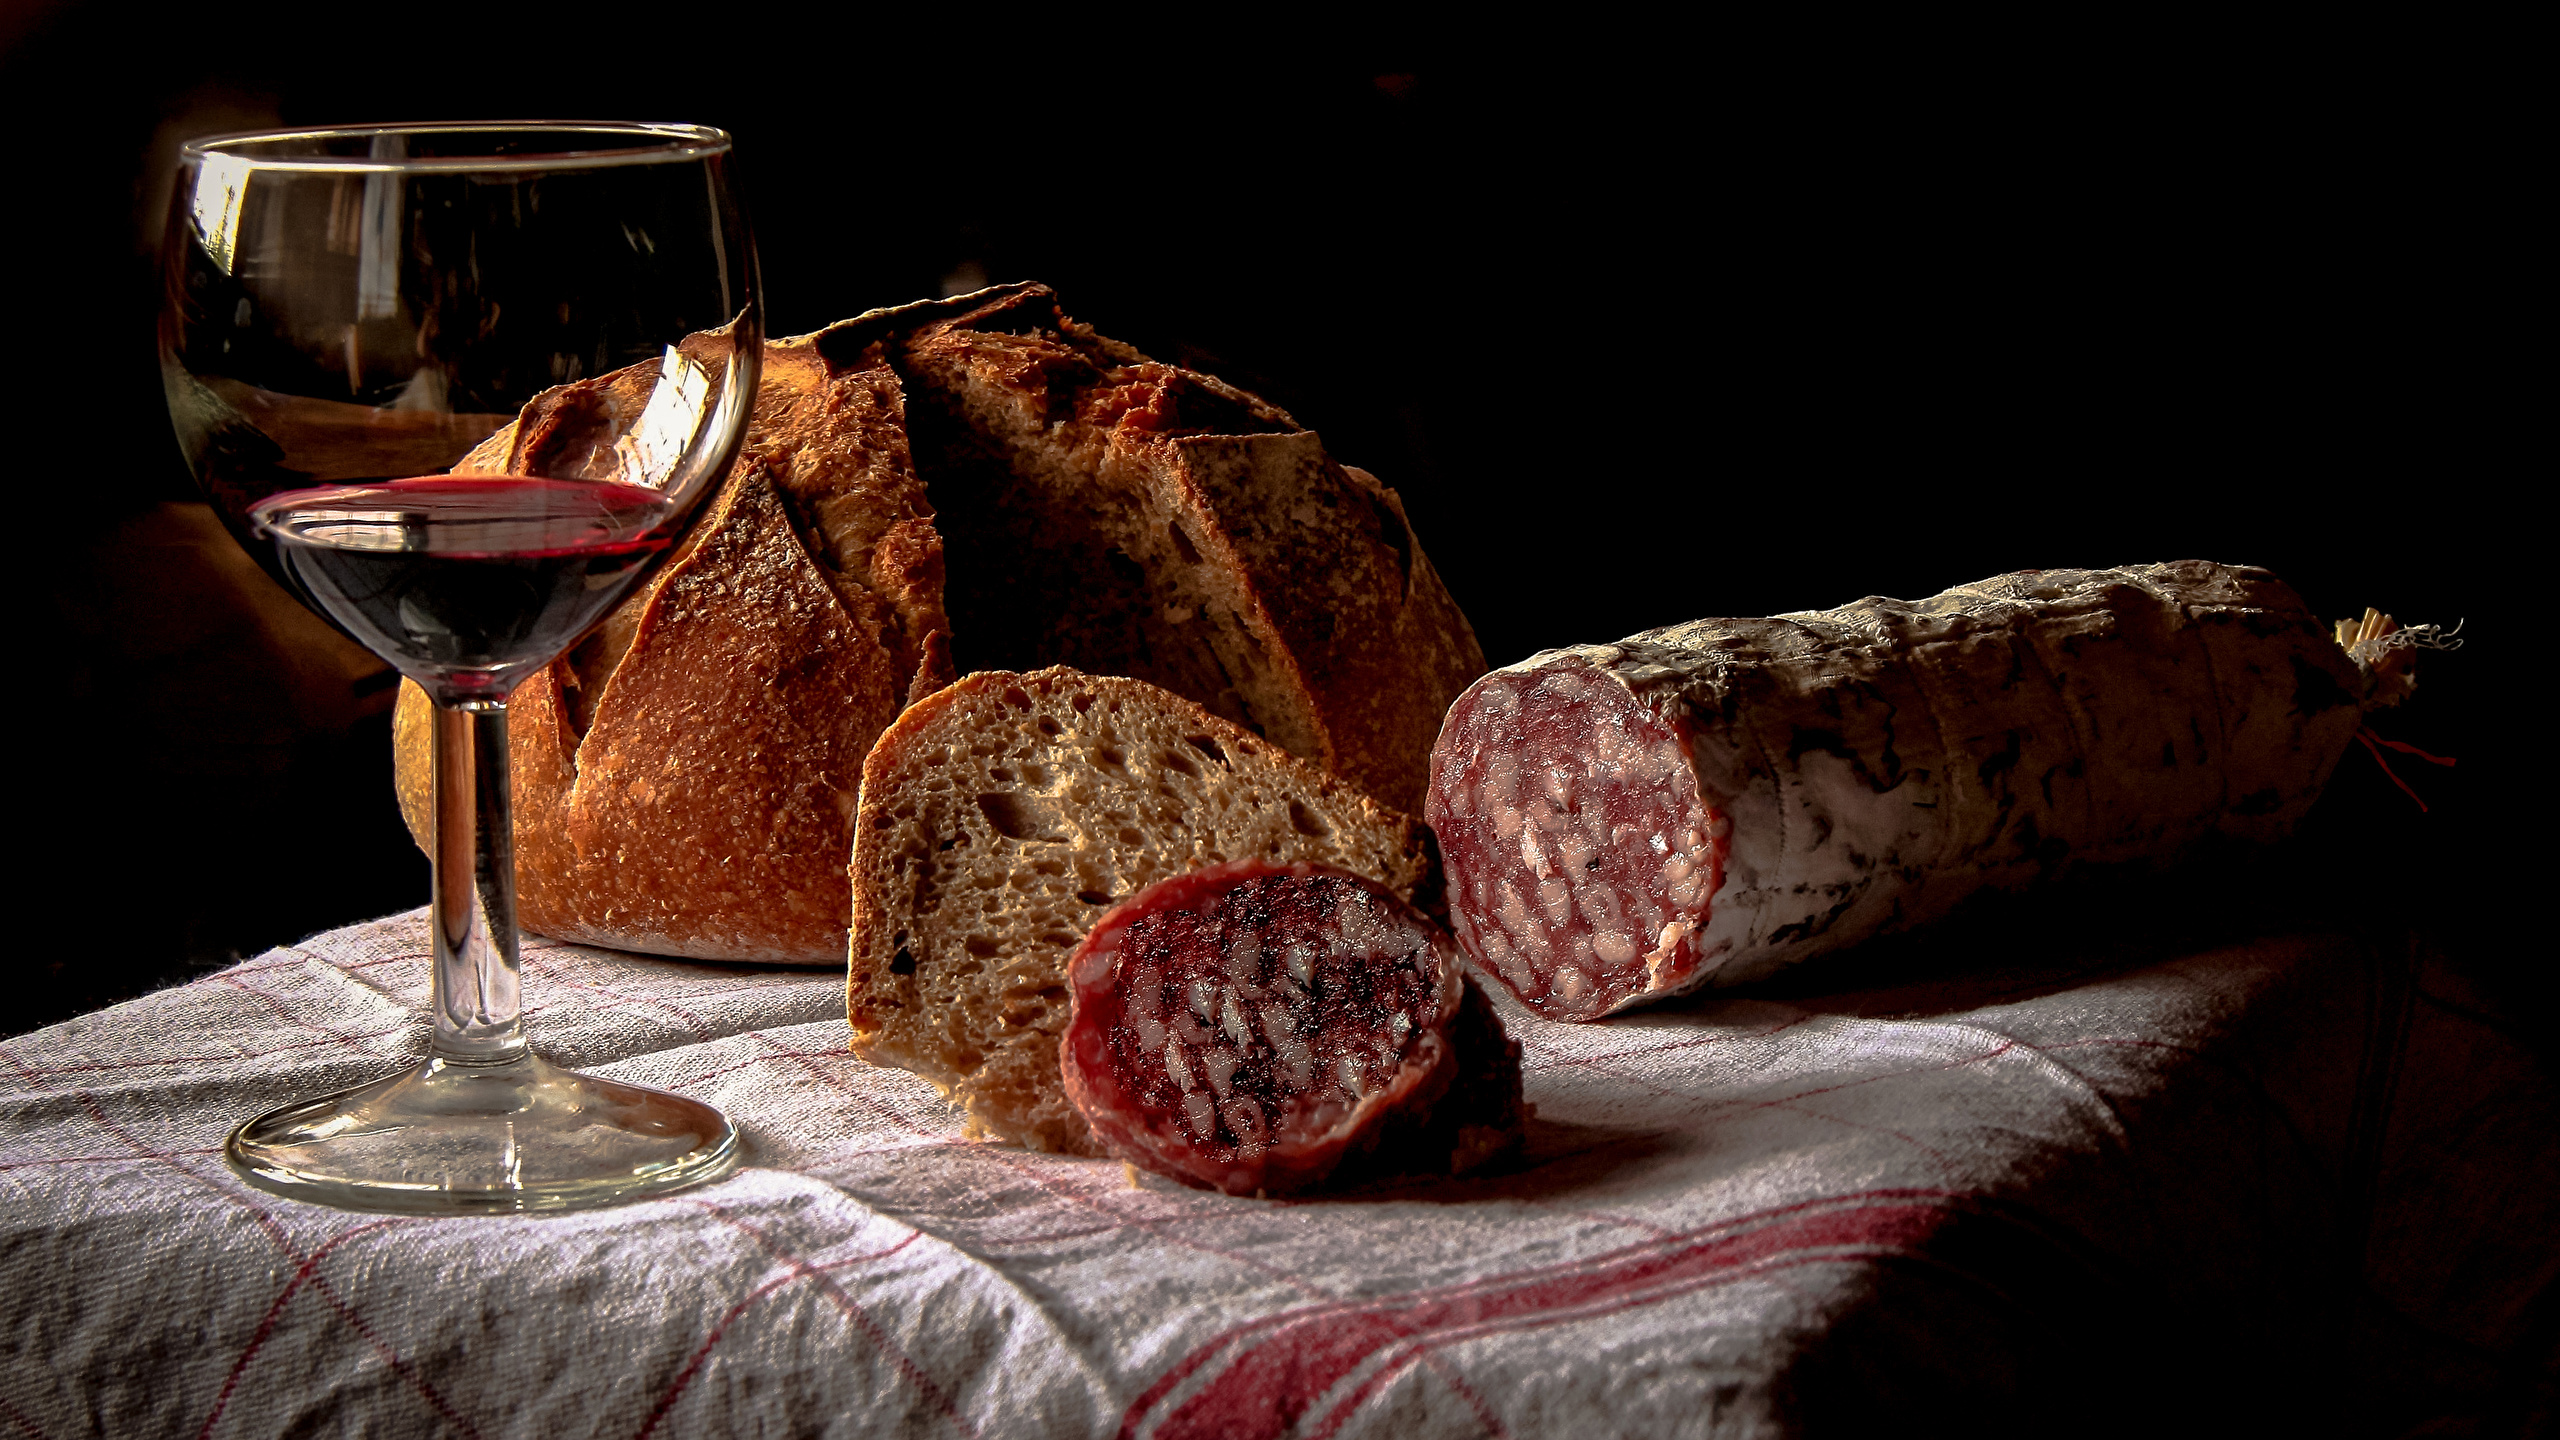 76 Image A5 Picture 2022 " Good Evening " Red Wine Bread And Sausage Image No